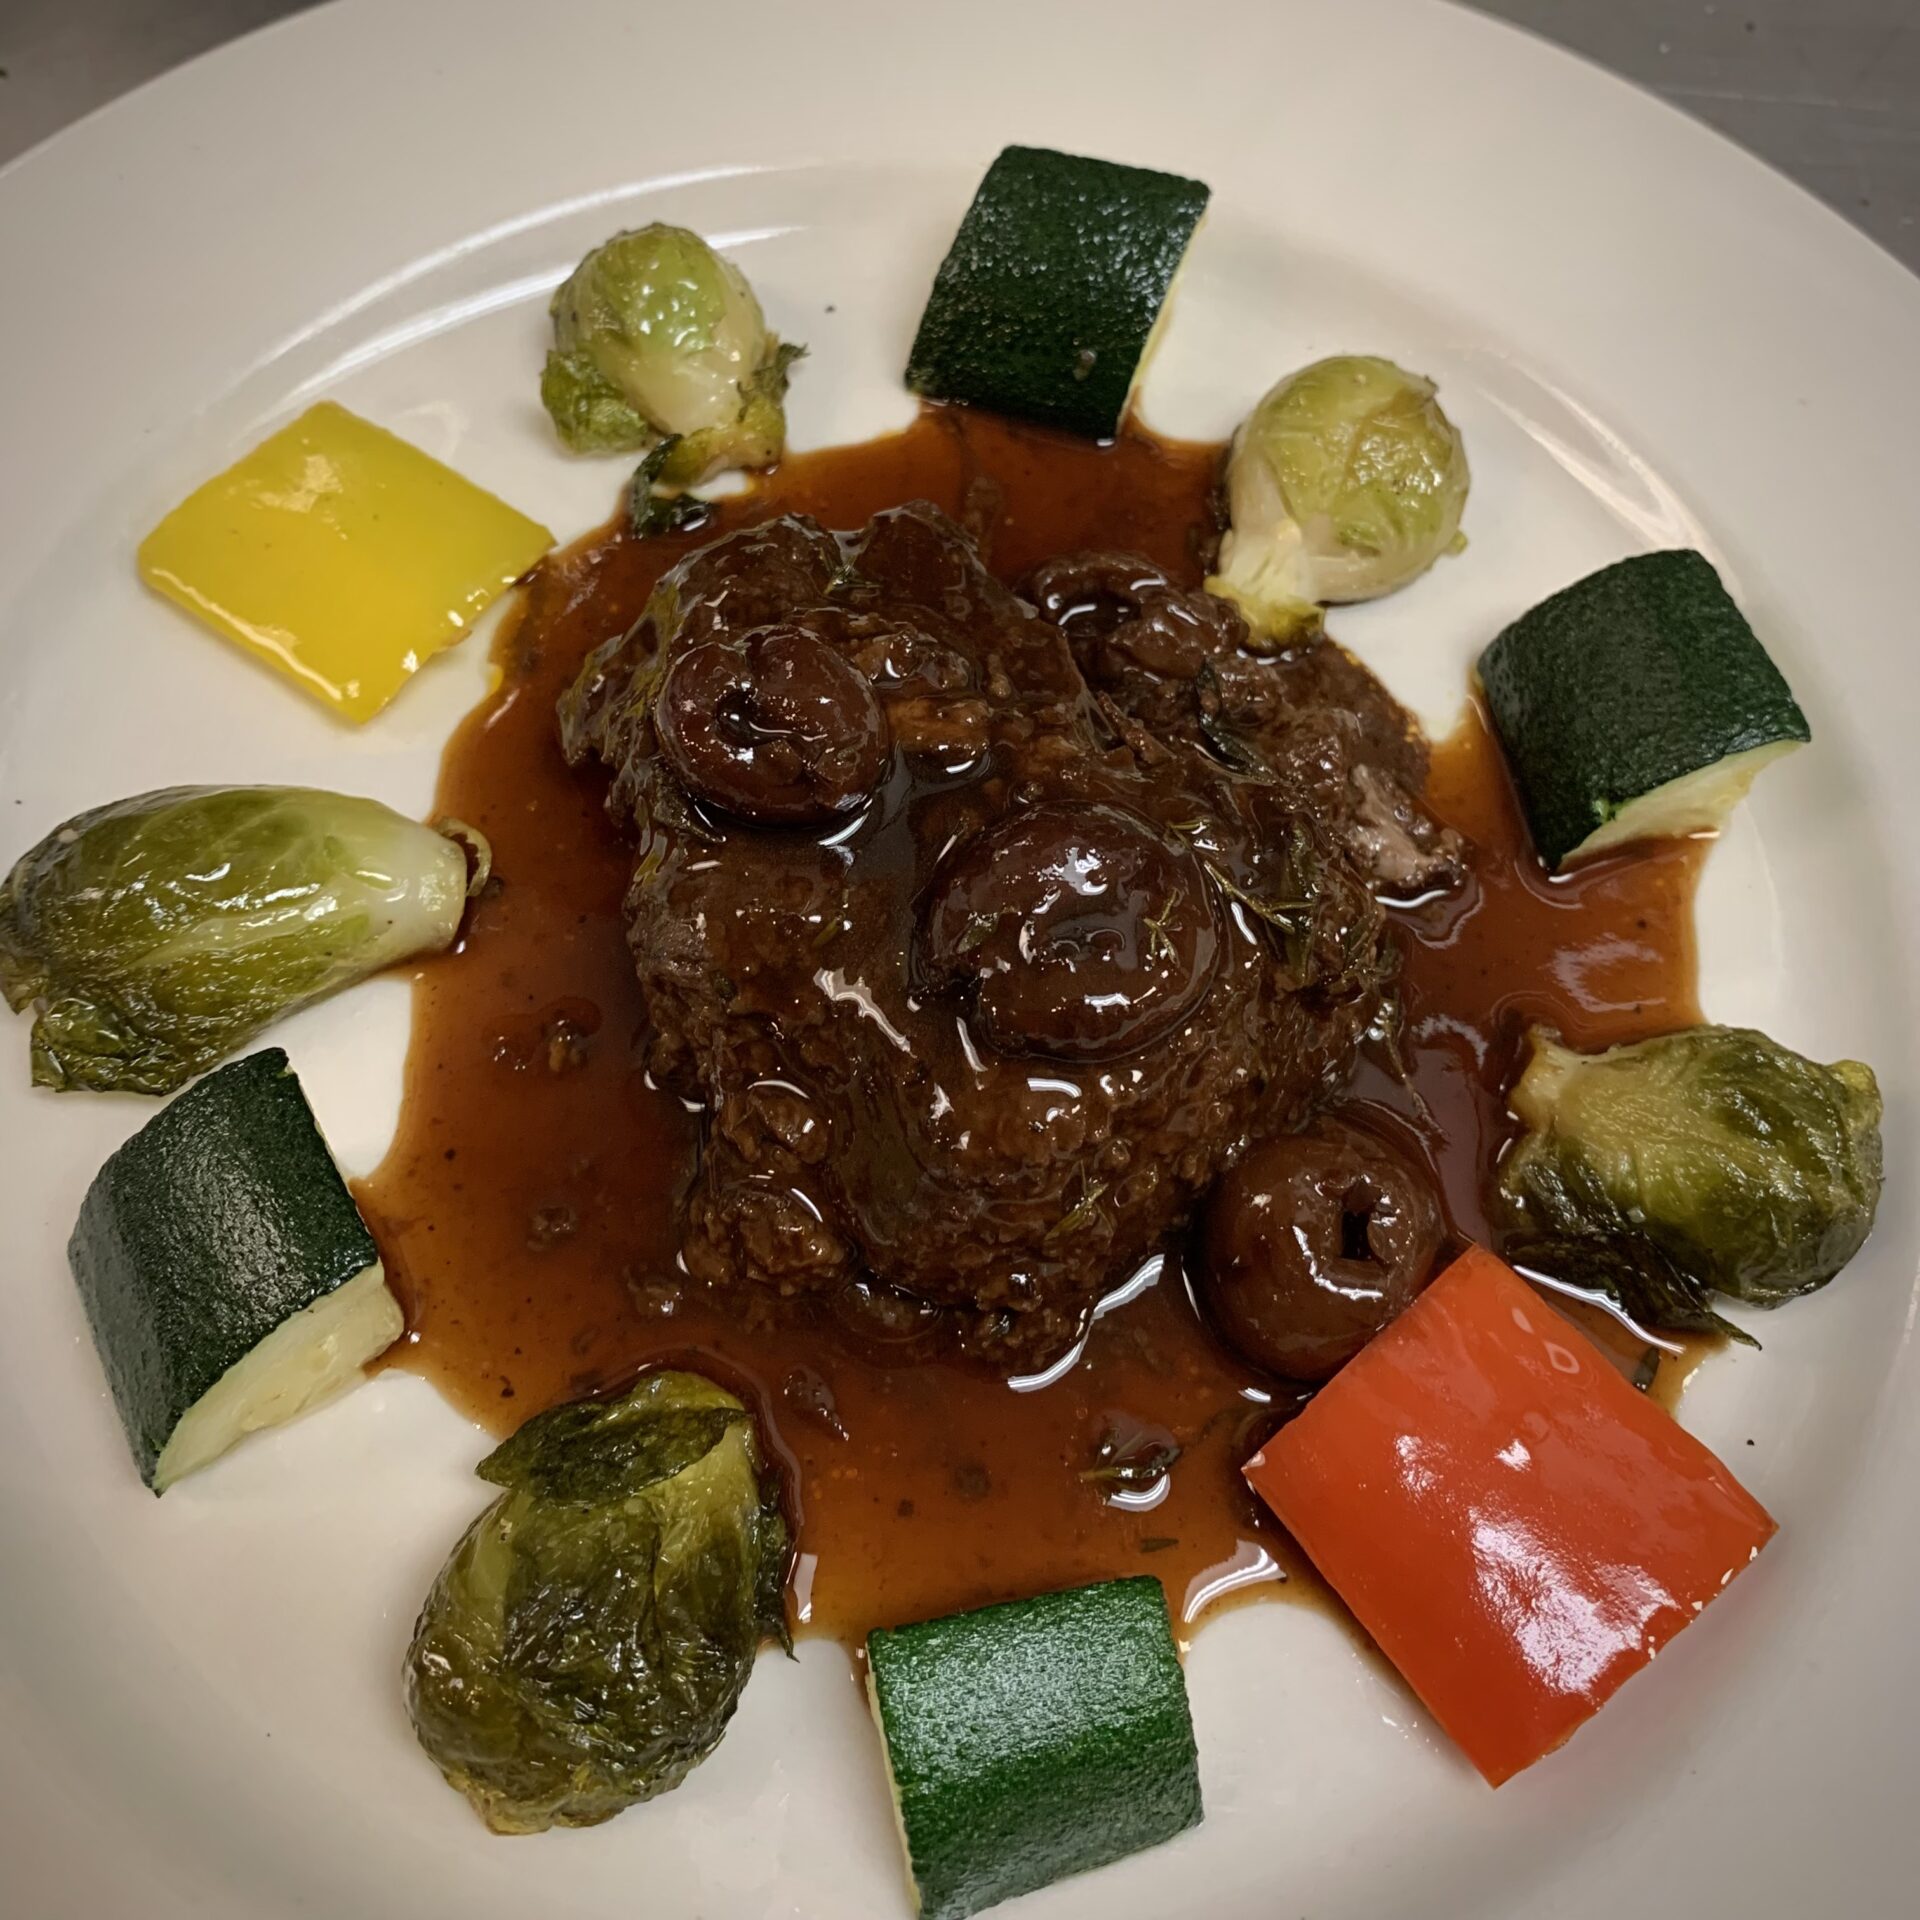 Platted main course dish with a brown sauce and garnished with cucumbers and brussels sprouts.